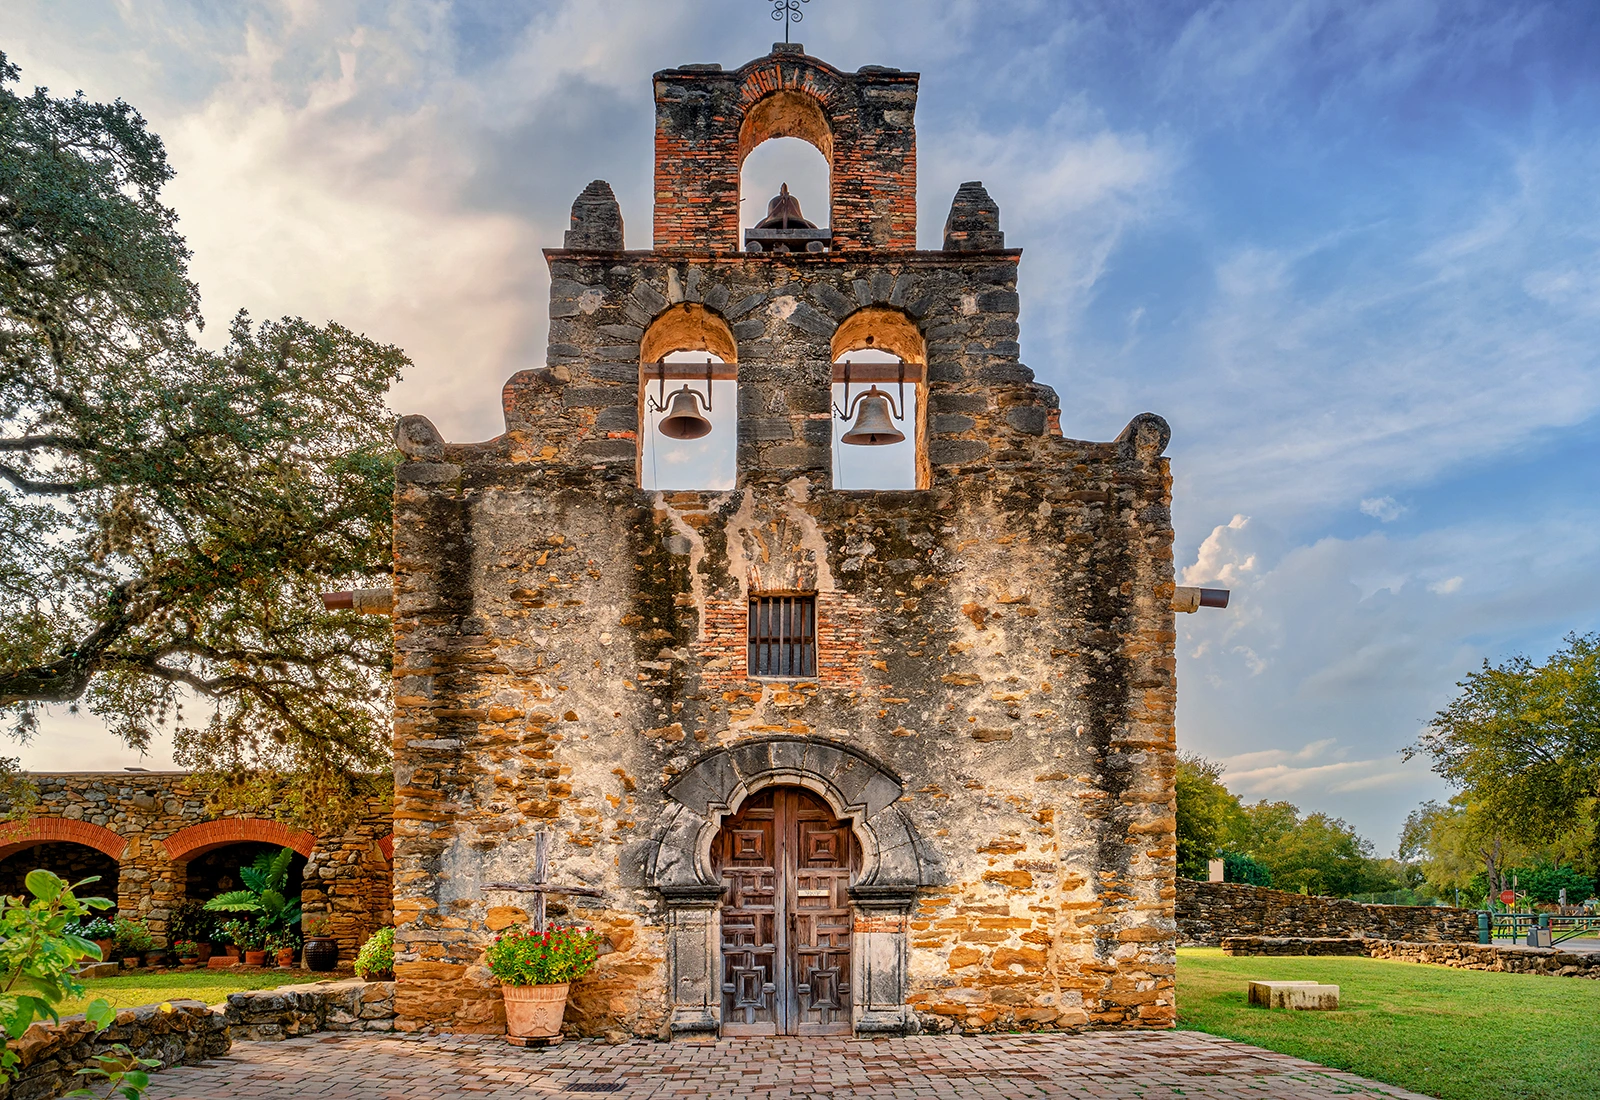 The Best Things To Do In San Antonio Texas